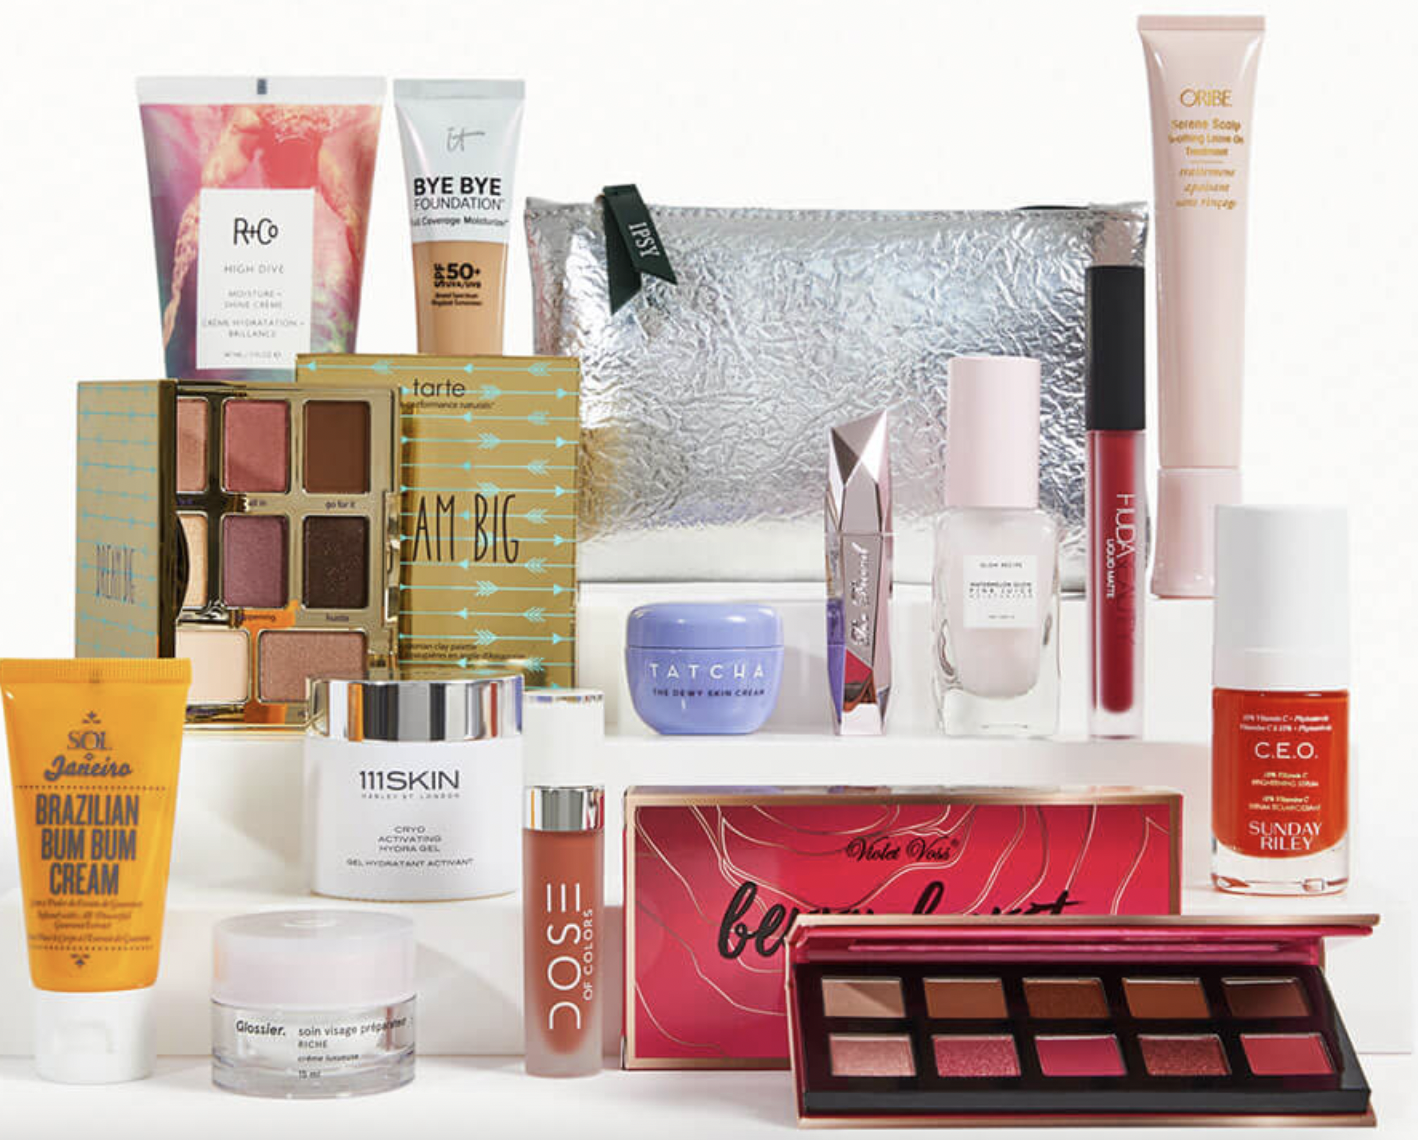 Ipsy: Get a Free Month of Refreshments When You Subscribe Today